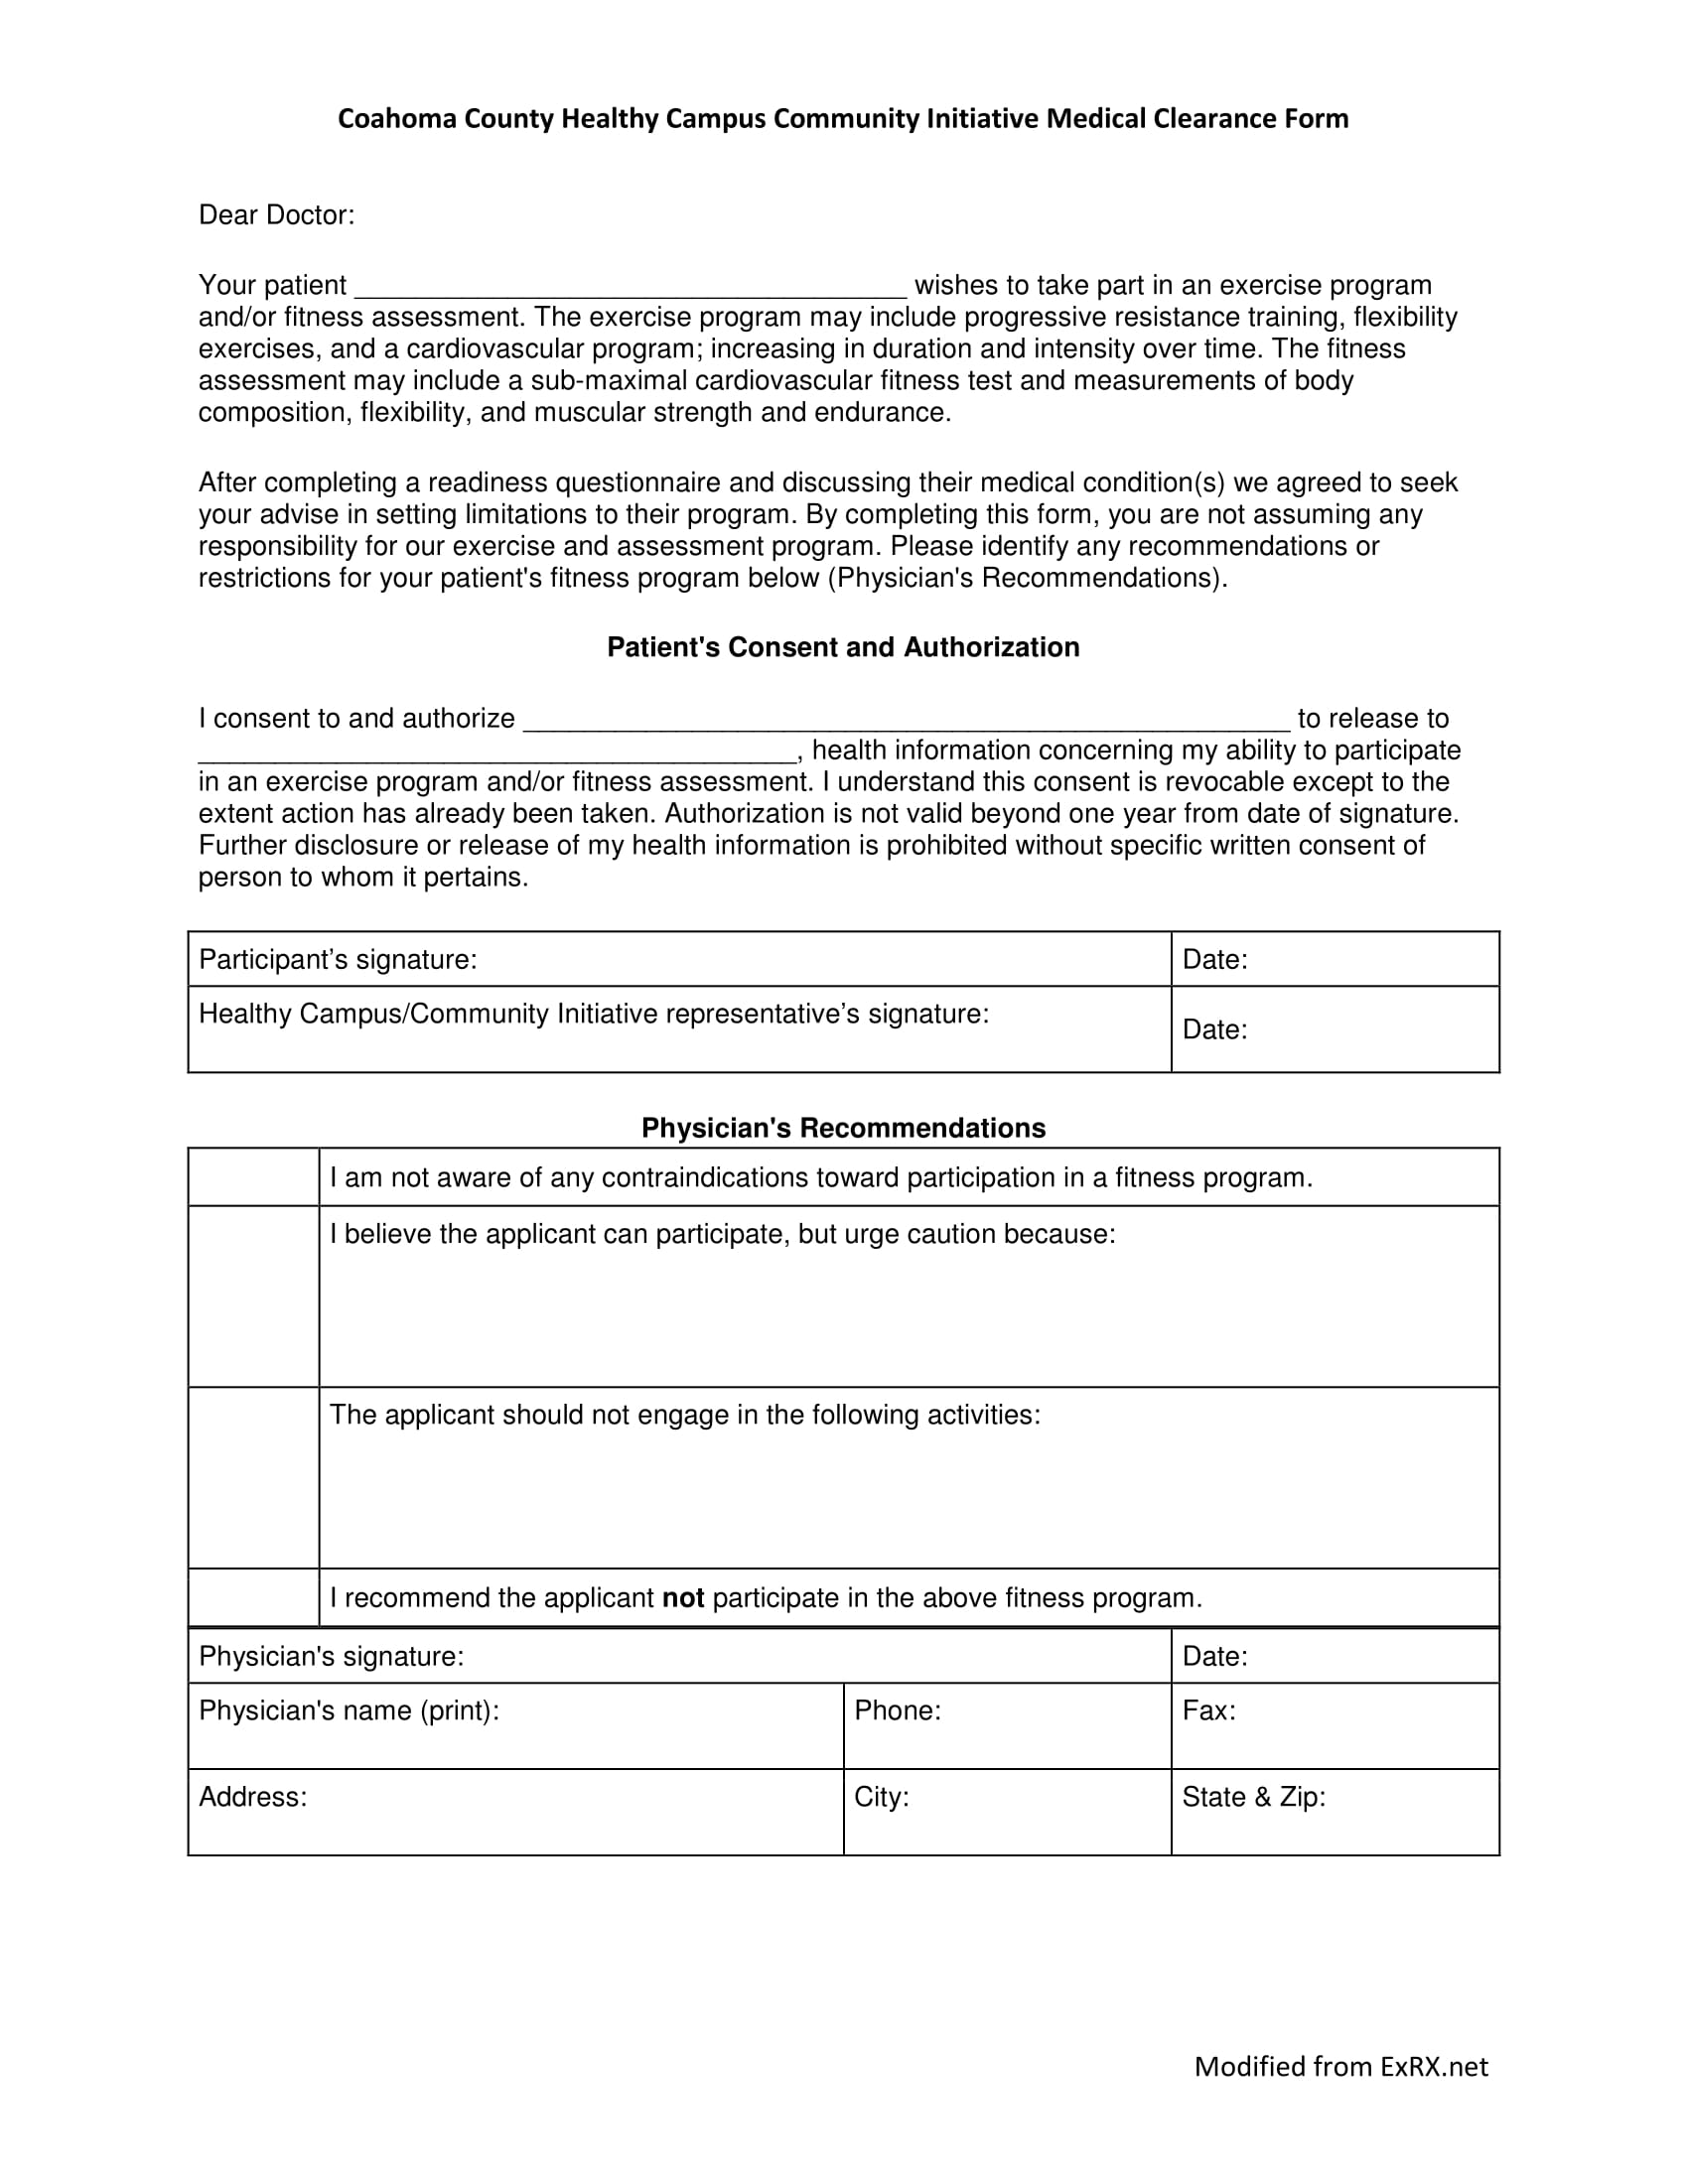 community initiative medical clearance form 1